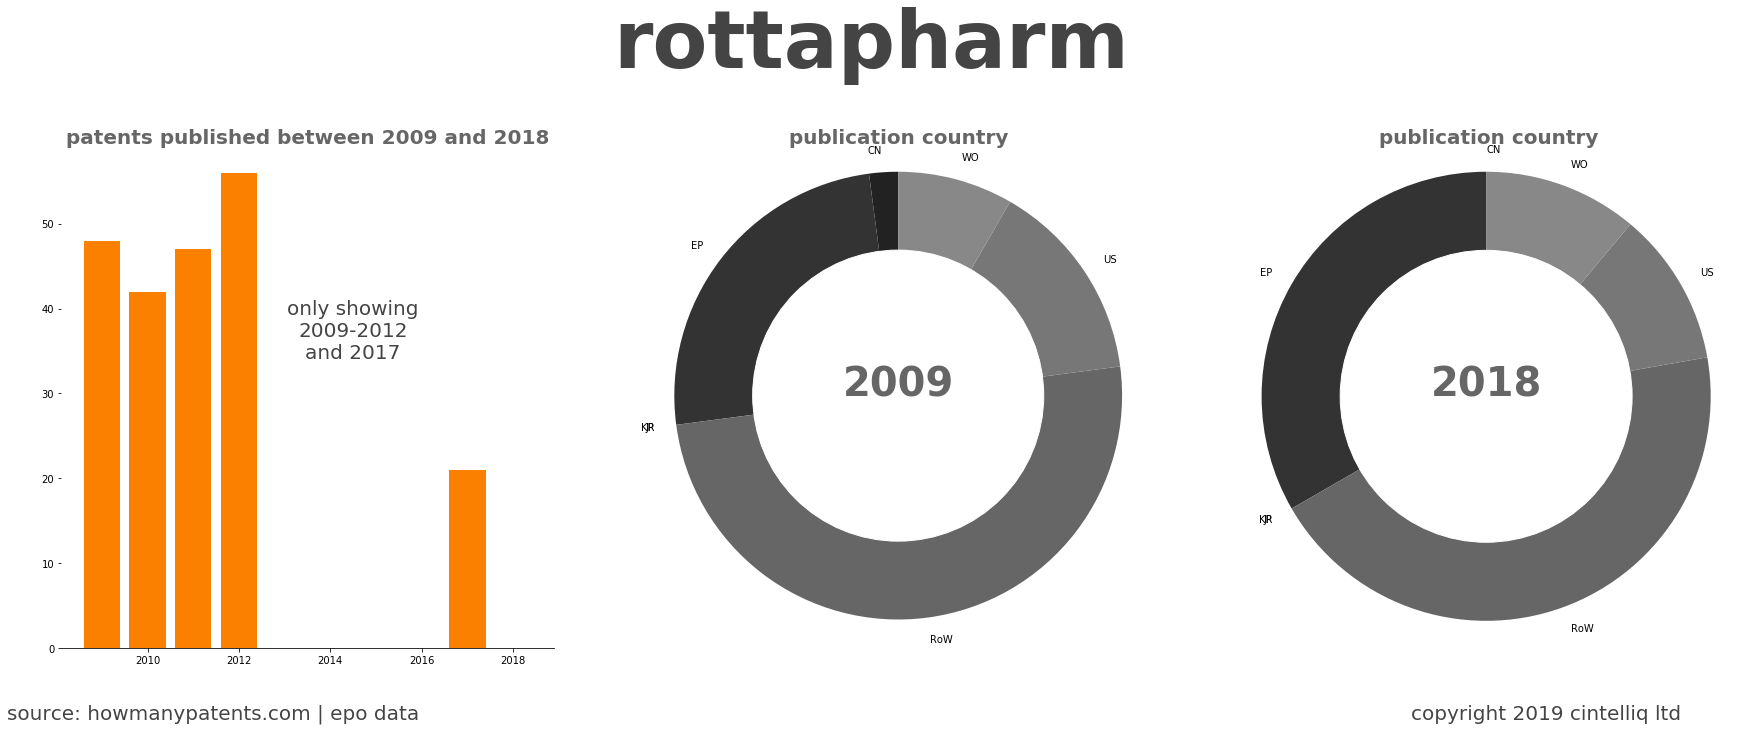 summary of patents for Rottapharm